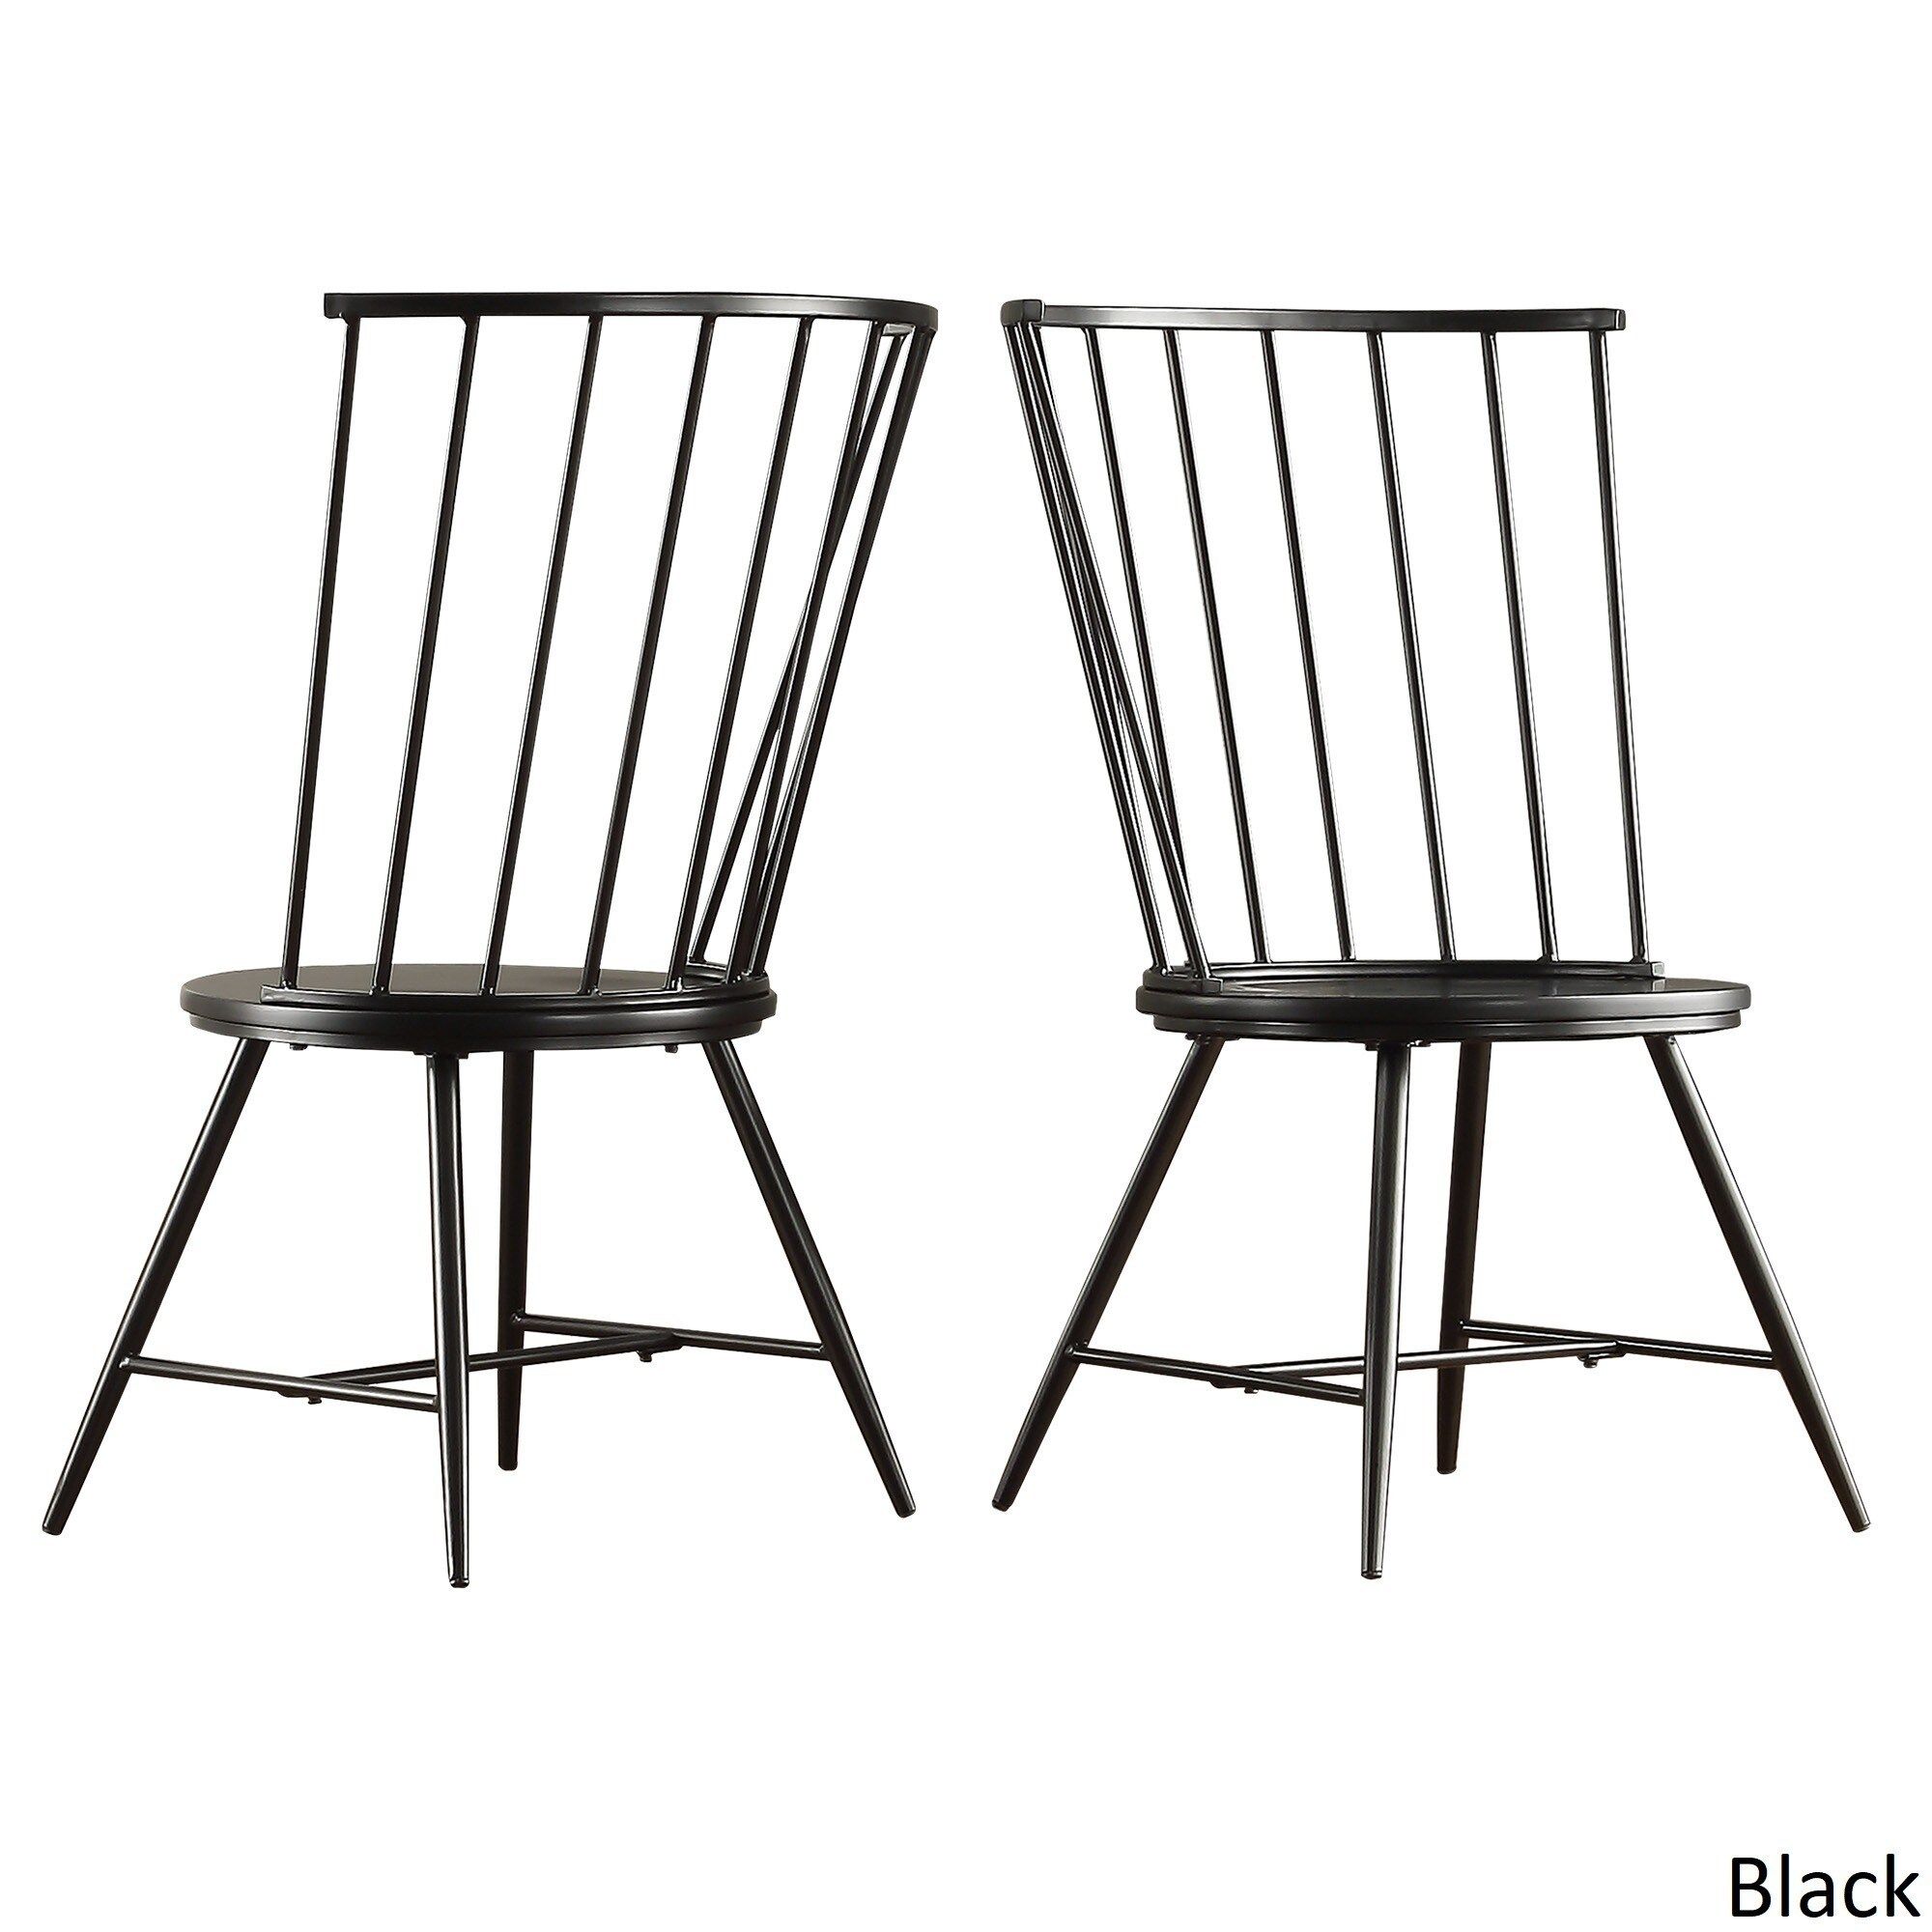 Truman High Back Windsor Classic Dining Chair (Set of 2) by iNSPIRE Q Modern - Black | Bed Bath & Beyond